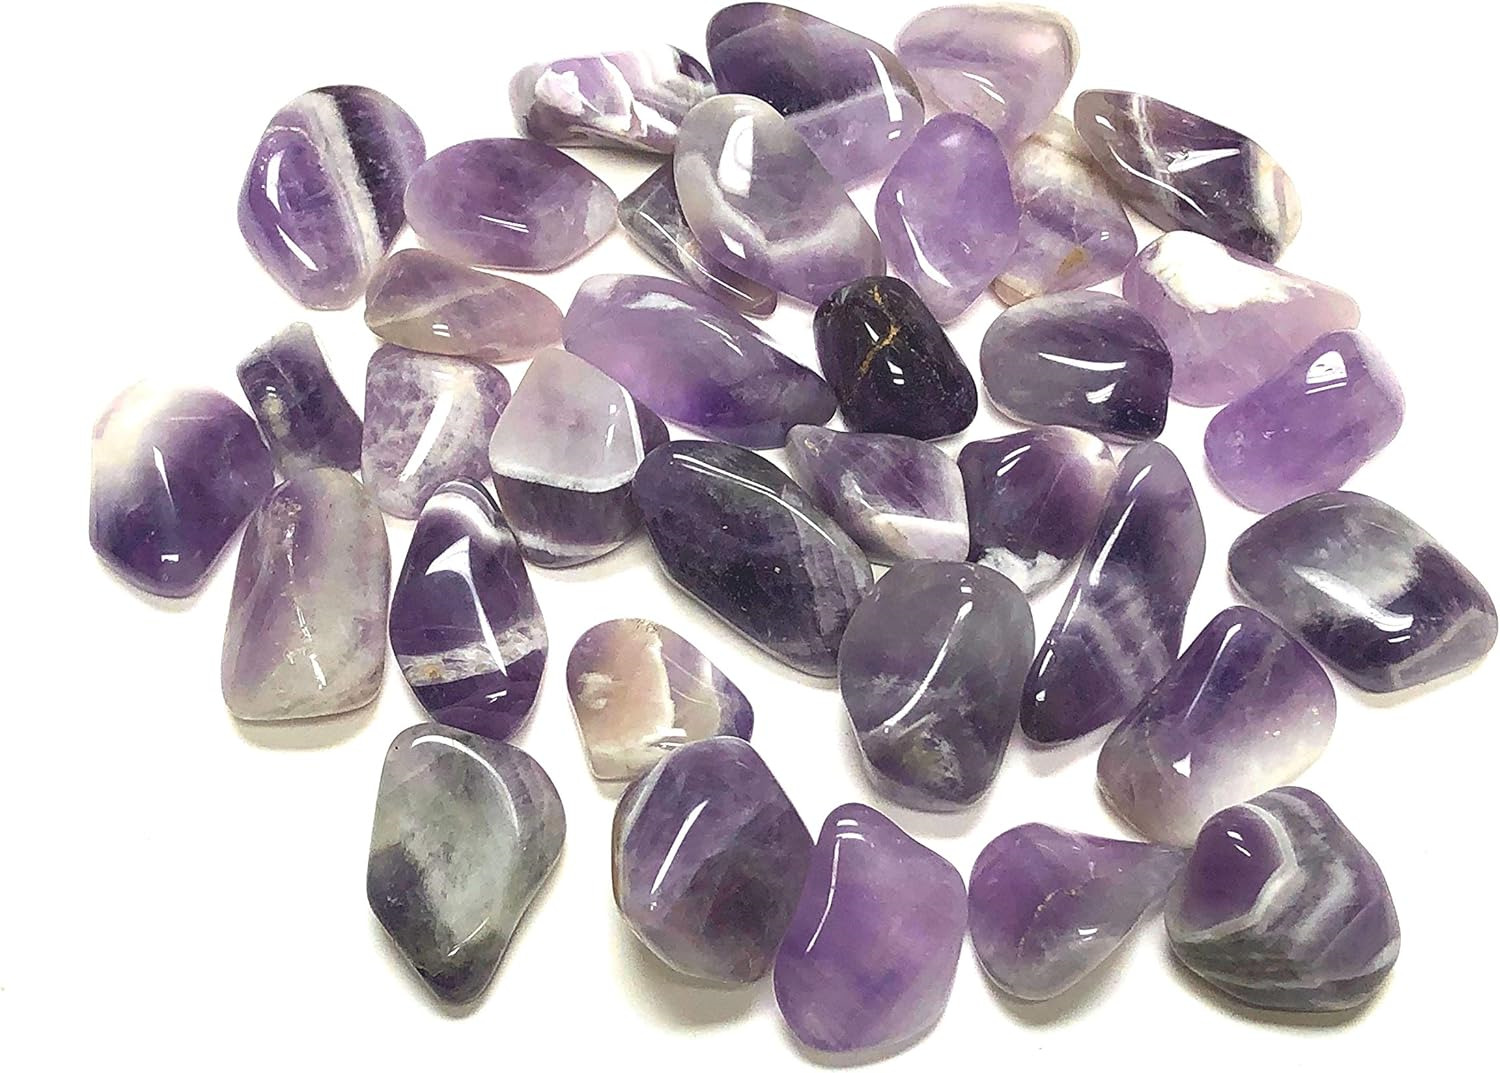 Zentron Crystal Collection Tumbled Banded Amethyst - 1 Piece